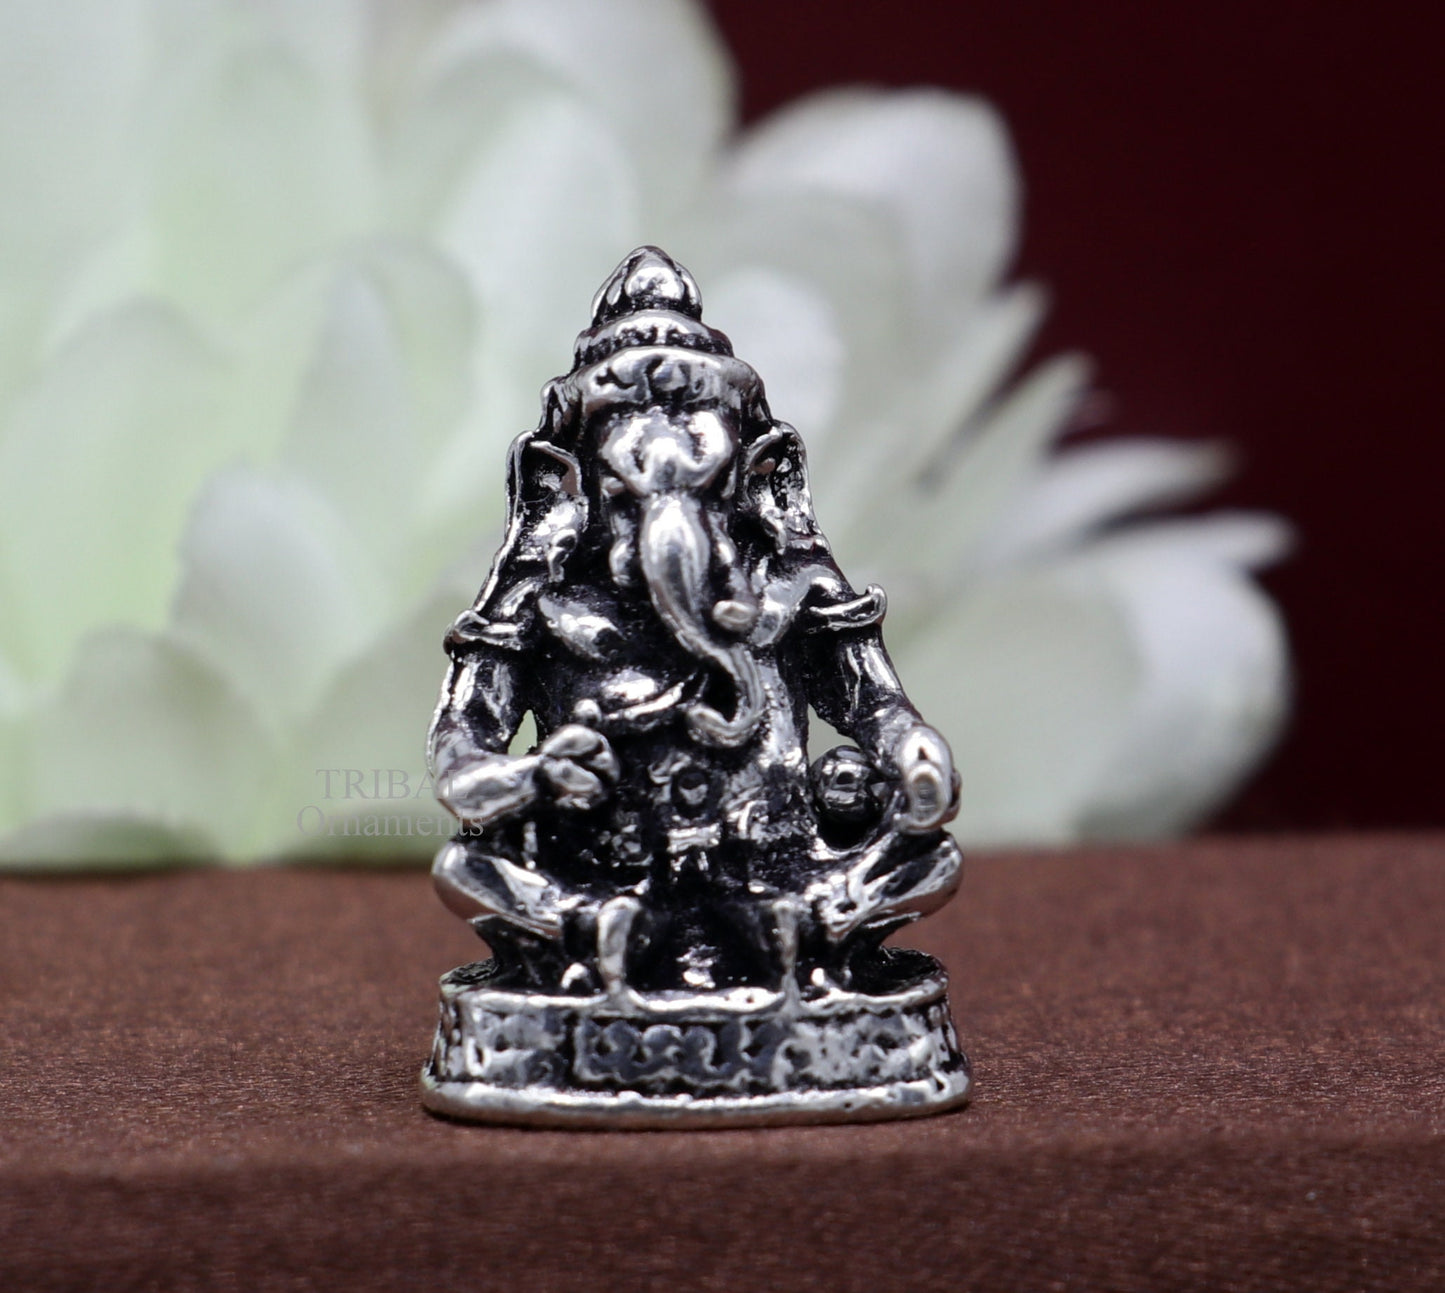 925 Sterling silver Lord Ganesh Idol small Aasan mudra style statue Figurine, handcrafted Lord Ganesh statue sculpture puja article art506 - TRIBAL ORNAMENTS